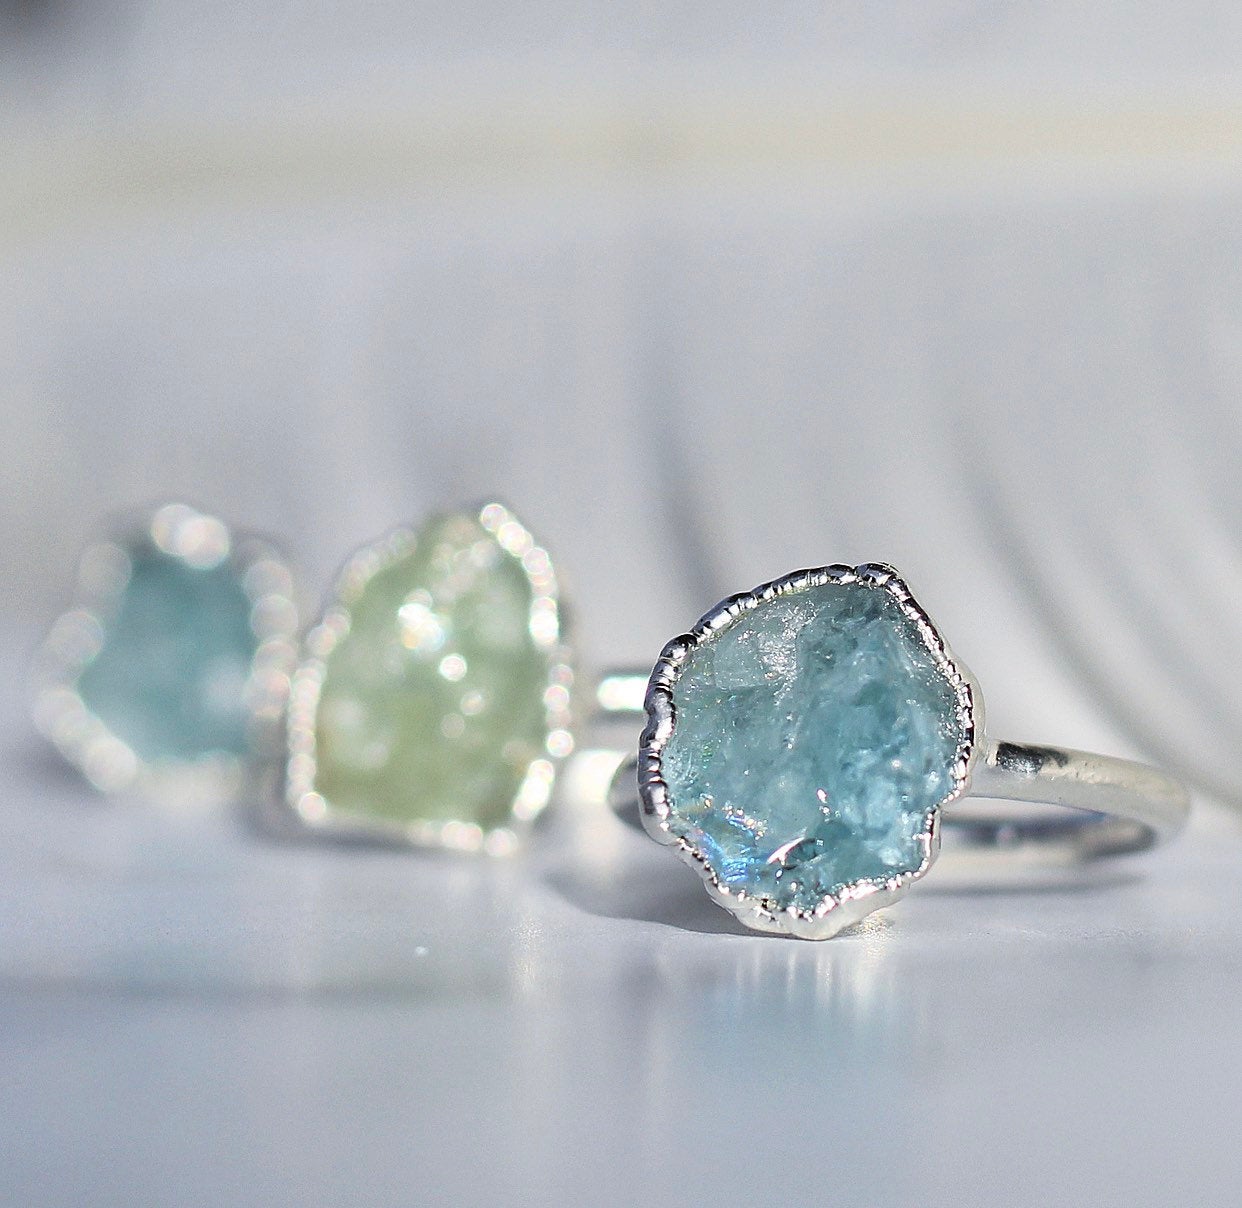 Natural Gemstone Rings,mix Wholesale Gemstone Rings,bulk Mystery Pack Rings,  Ring for Women,silver Plated Ring, Wholesale Jewelry Bulk Sale - Etsy